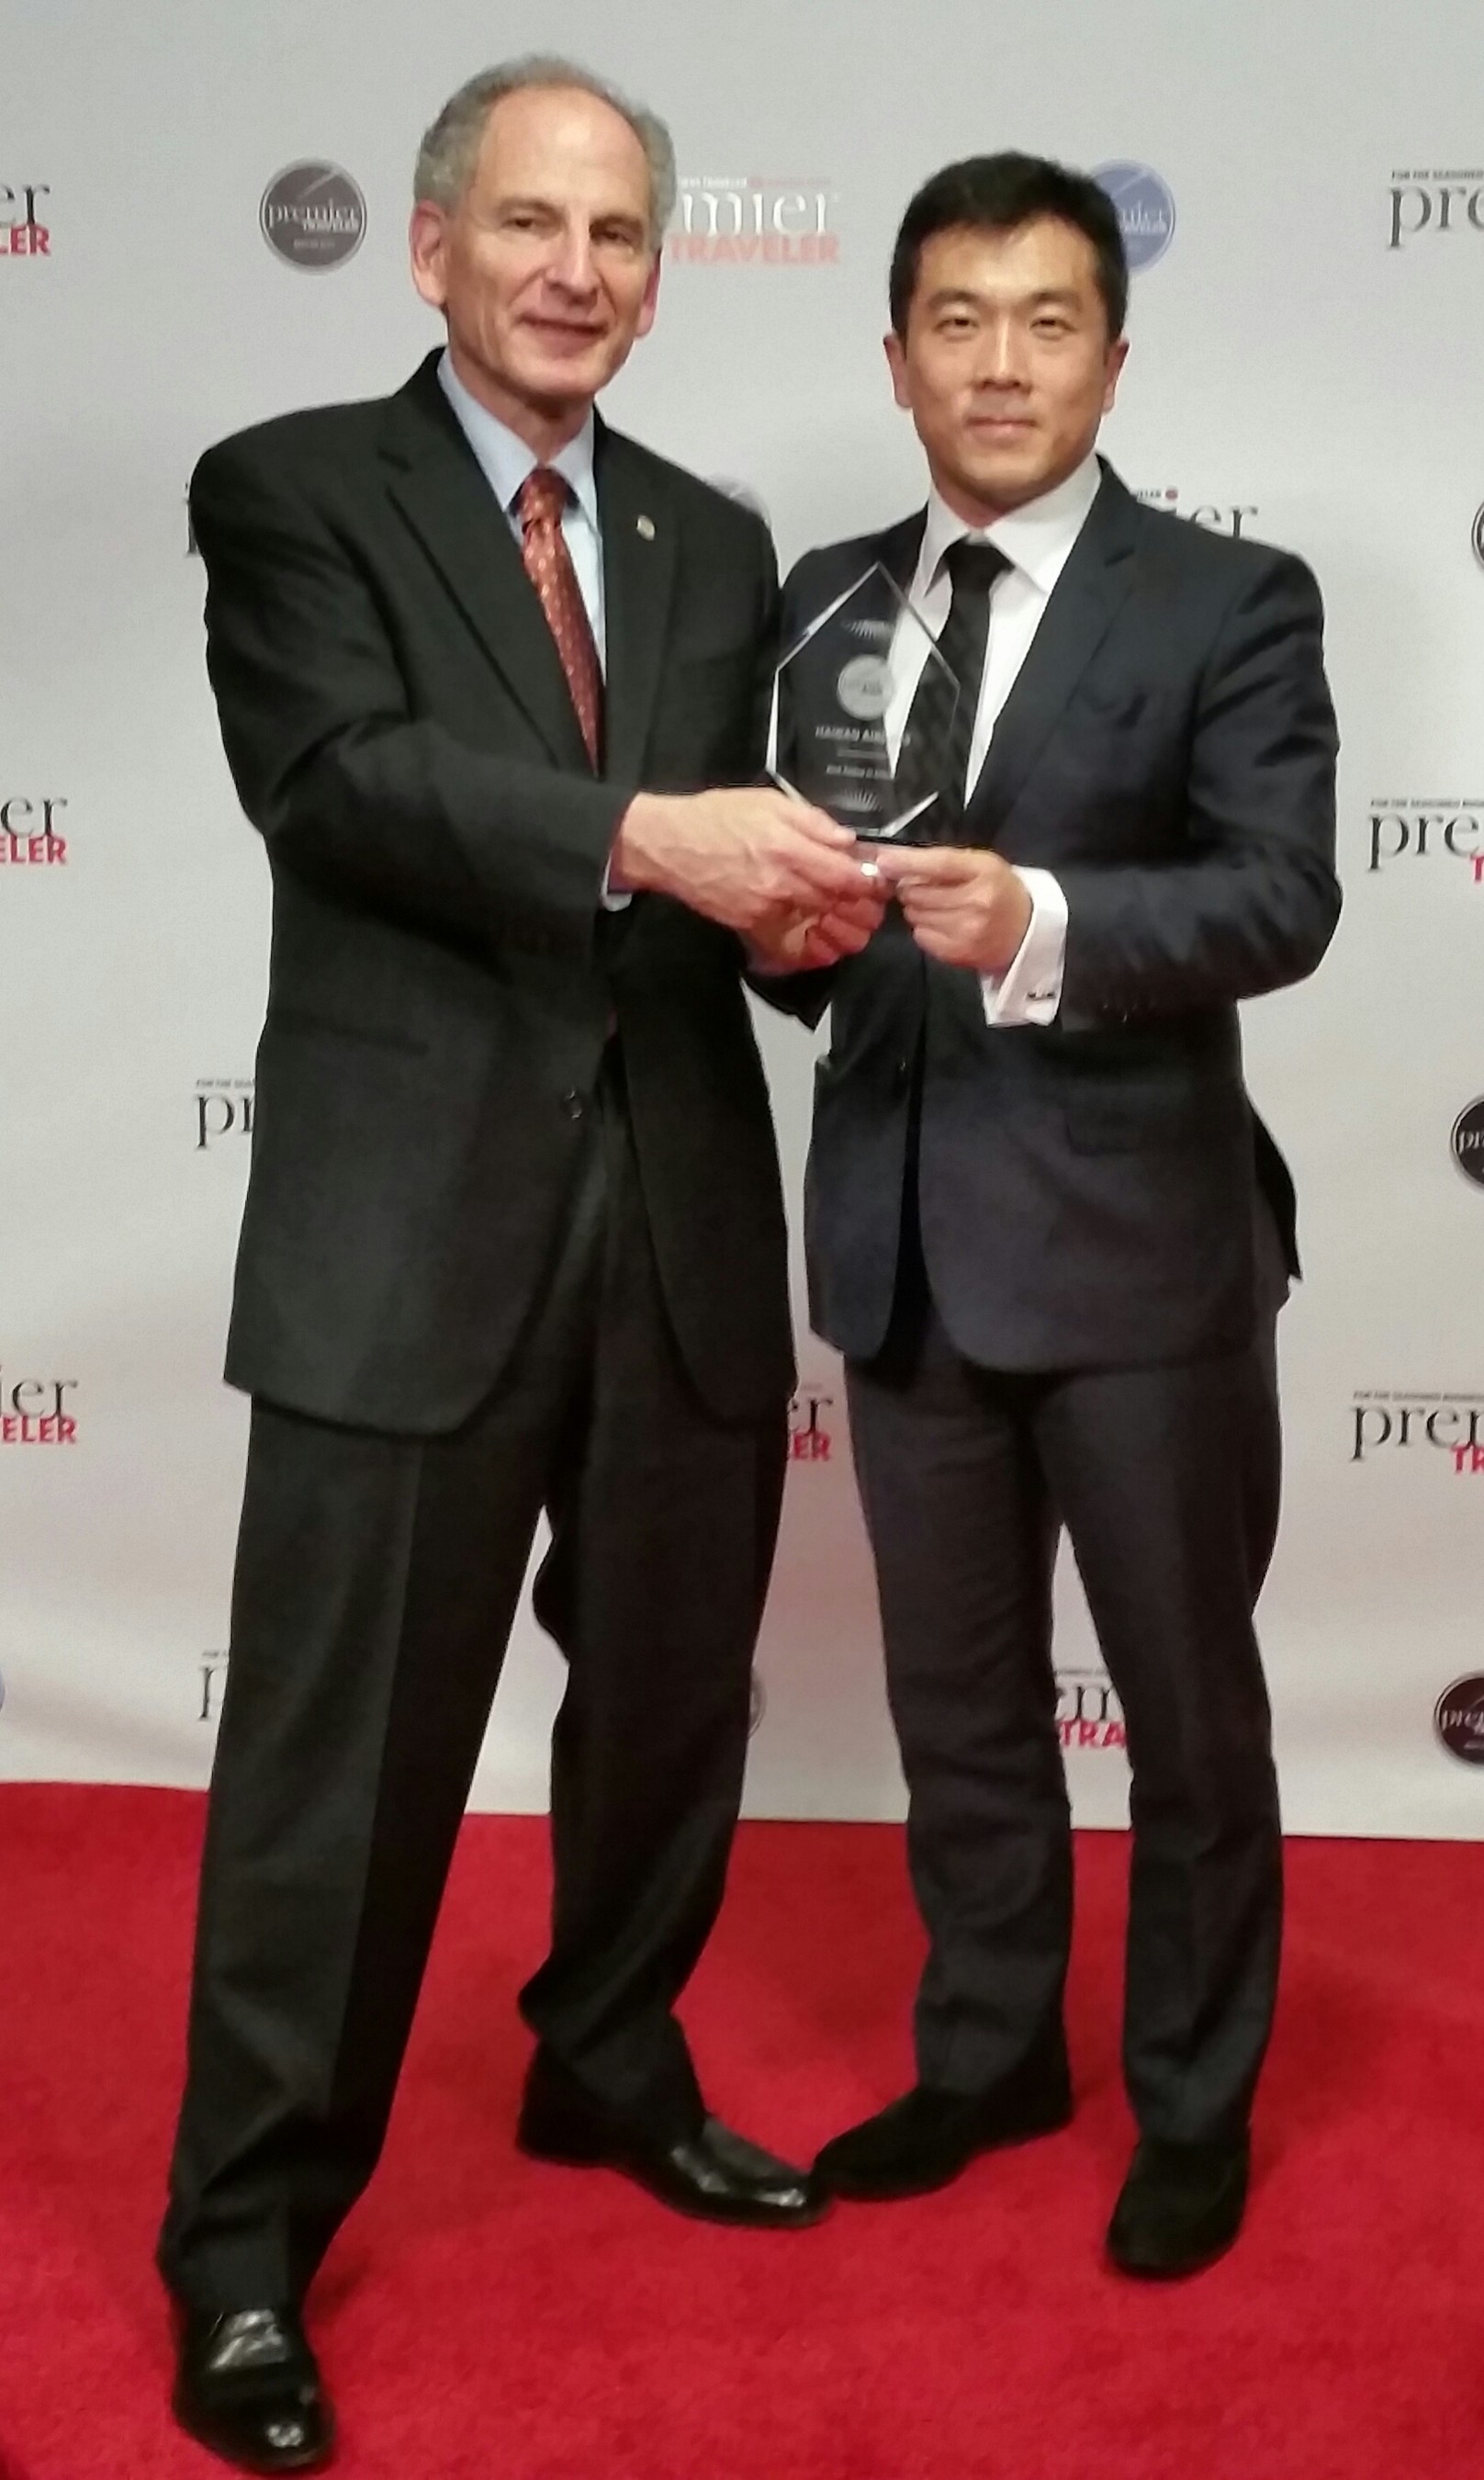 Hainan Airlines U.S. Executive Director Joel Chusid and North American Managing Director Pubin Liang accept the Premier Traveler award for Best Airline in China.